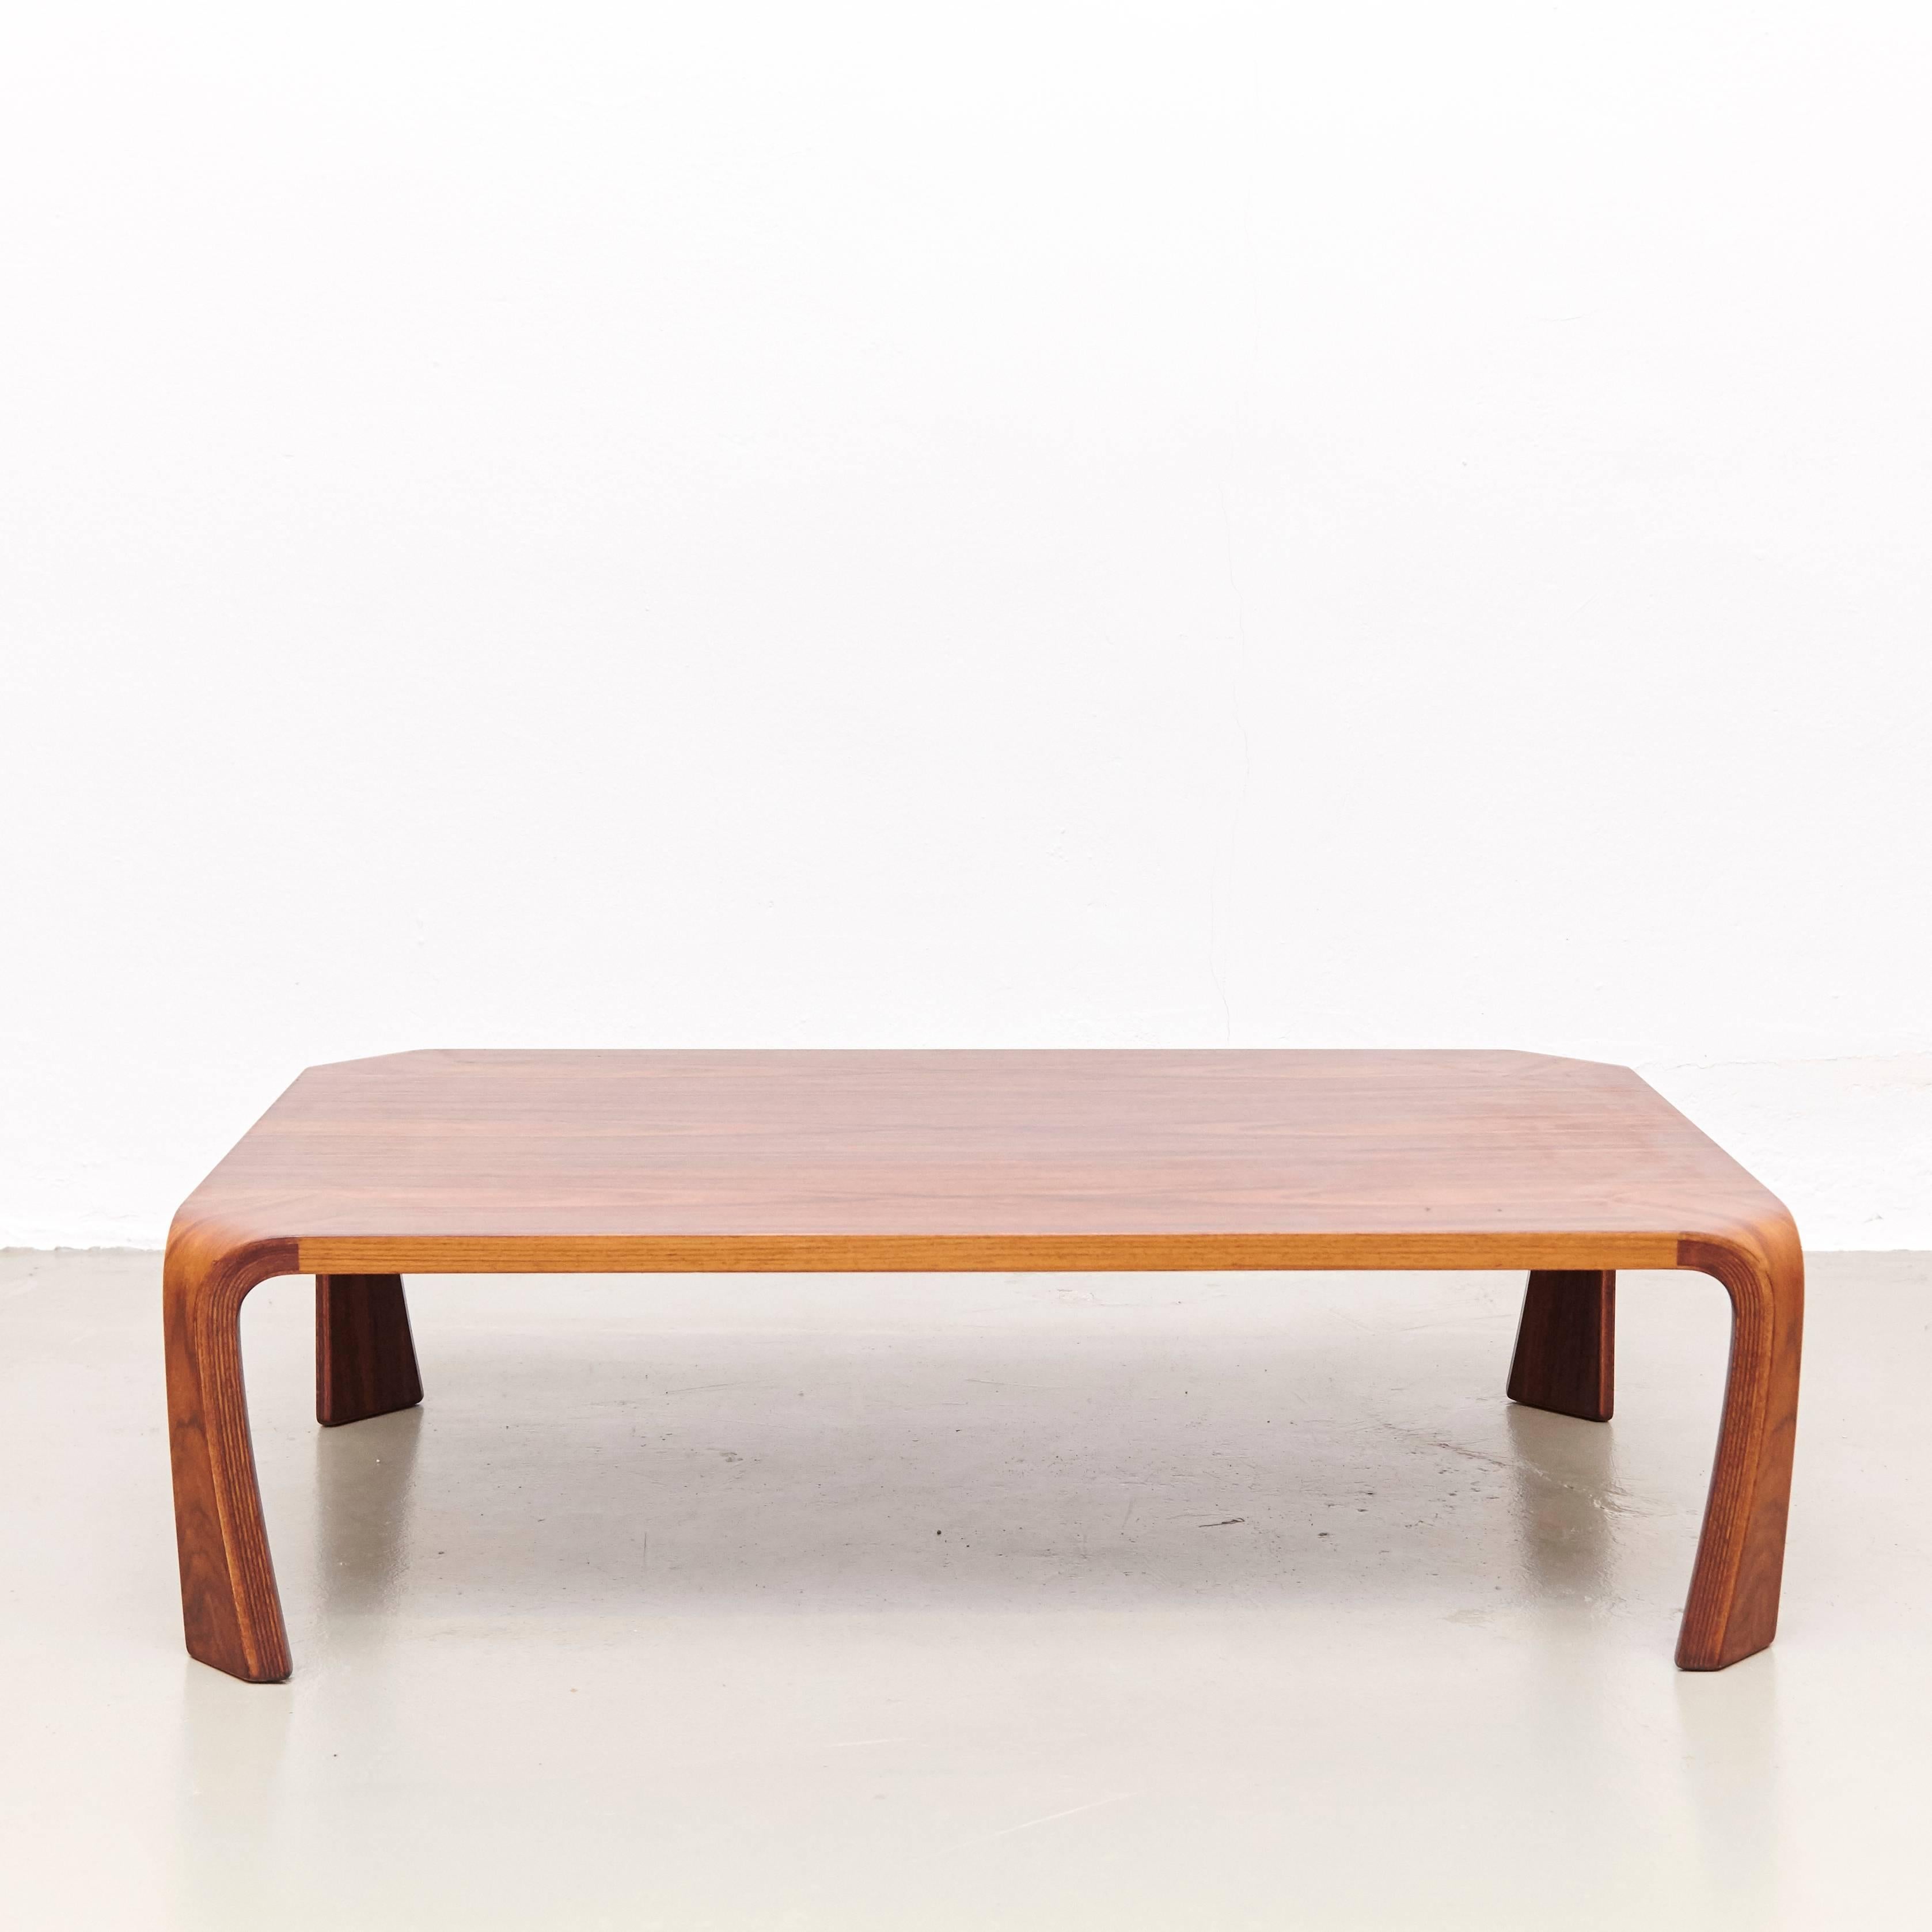 Stunning coffee table in bent rosewood, designed by Saburo Inui, manufactured by Tendo in Japan, 1960s.

In good original condition with minor wear consistent with age and use, preserving a beautiful patina.

